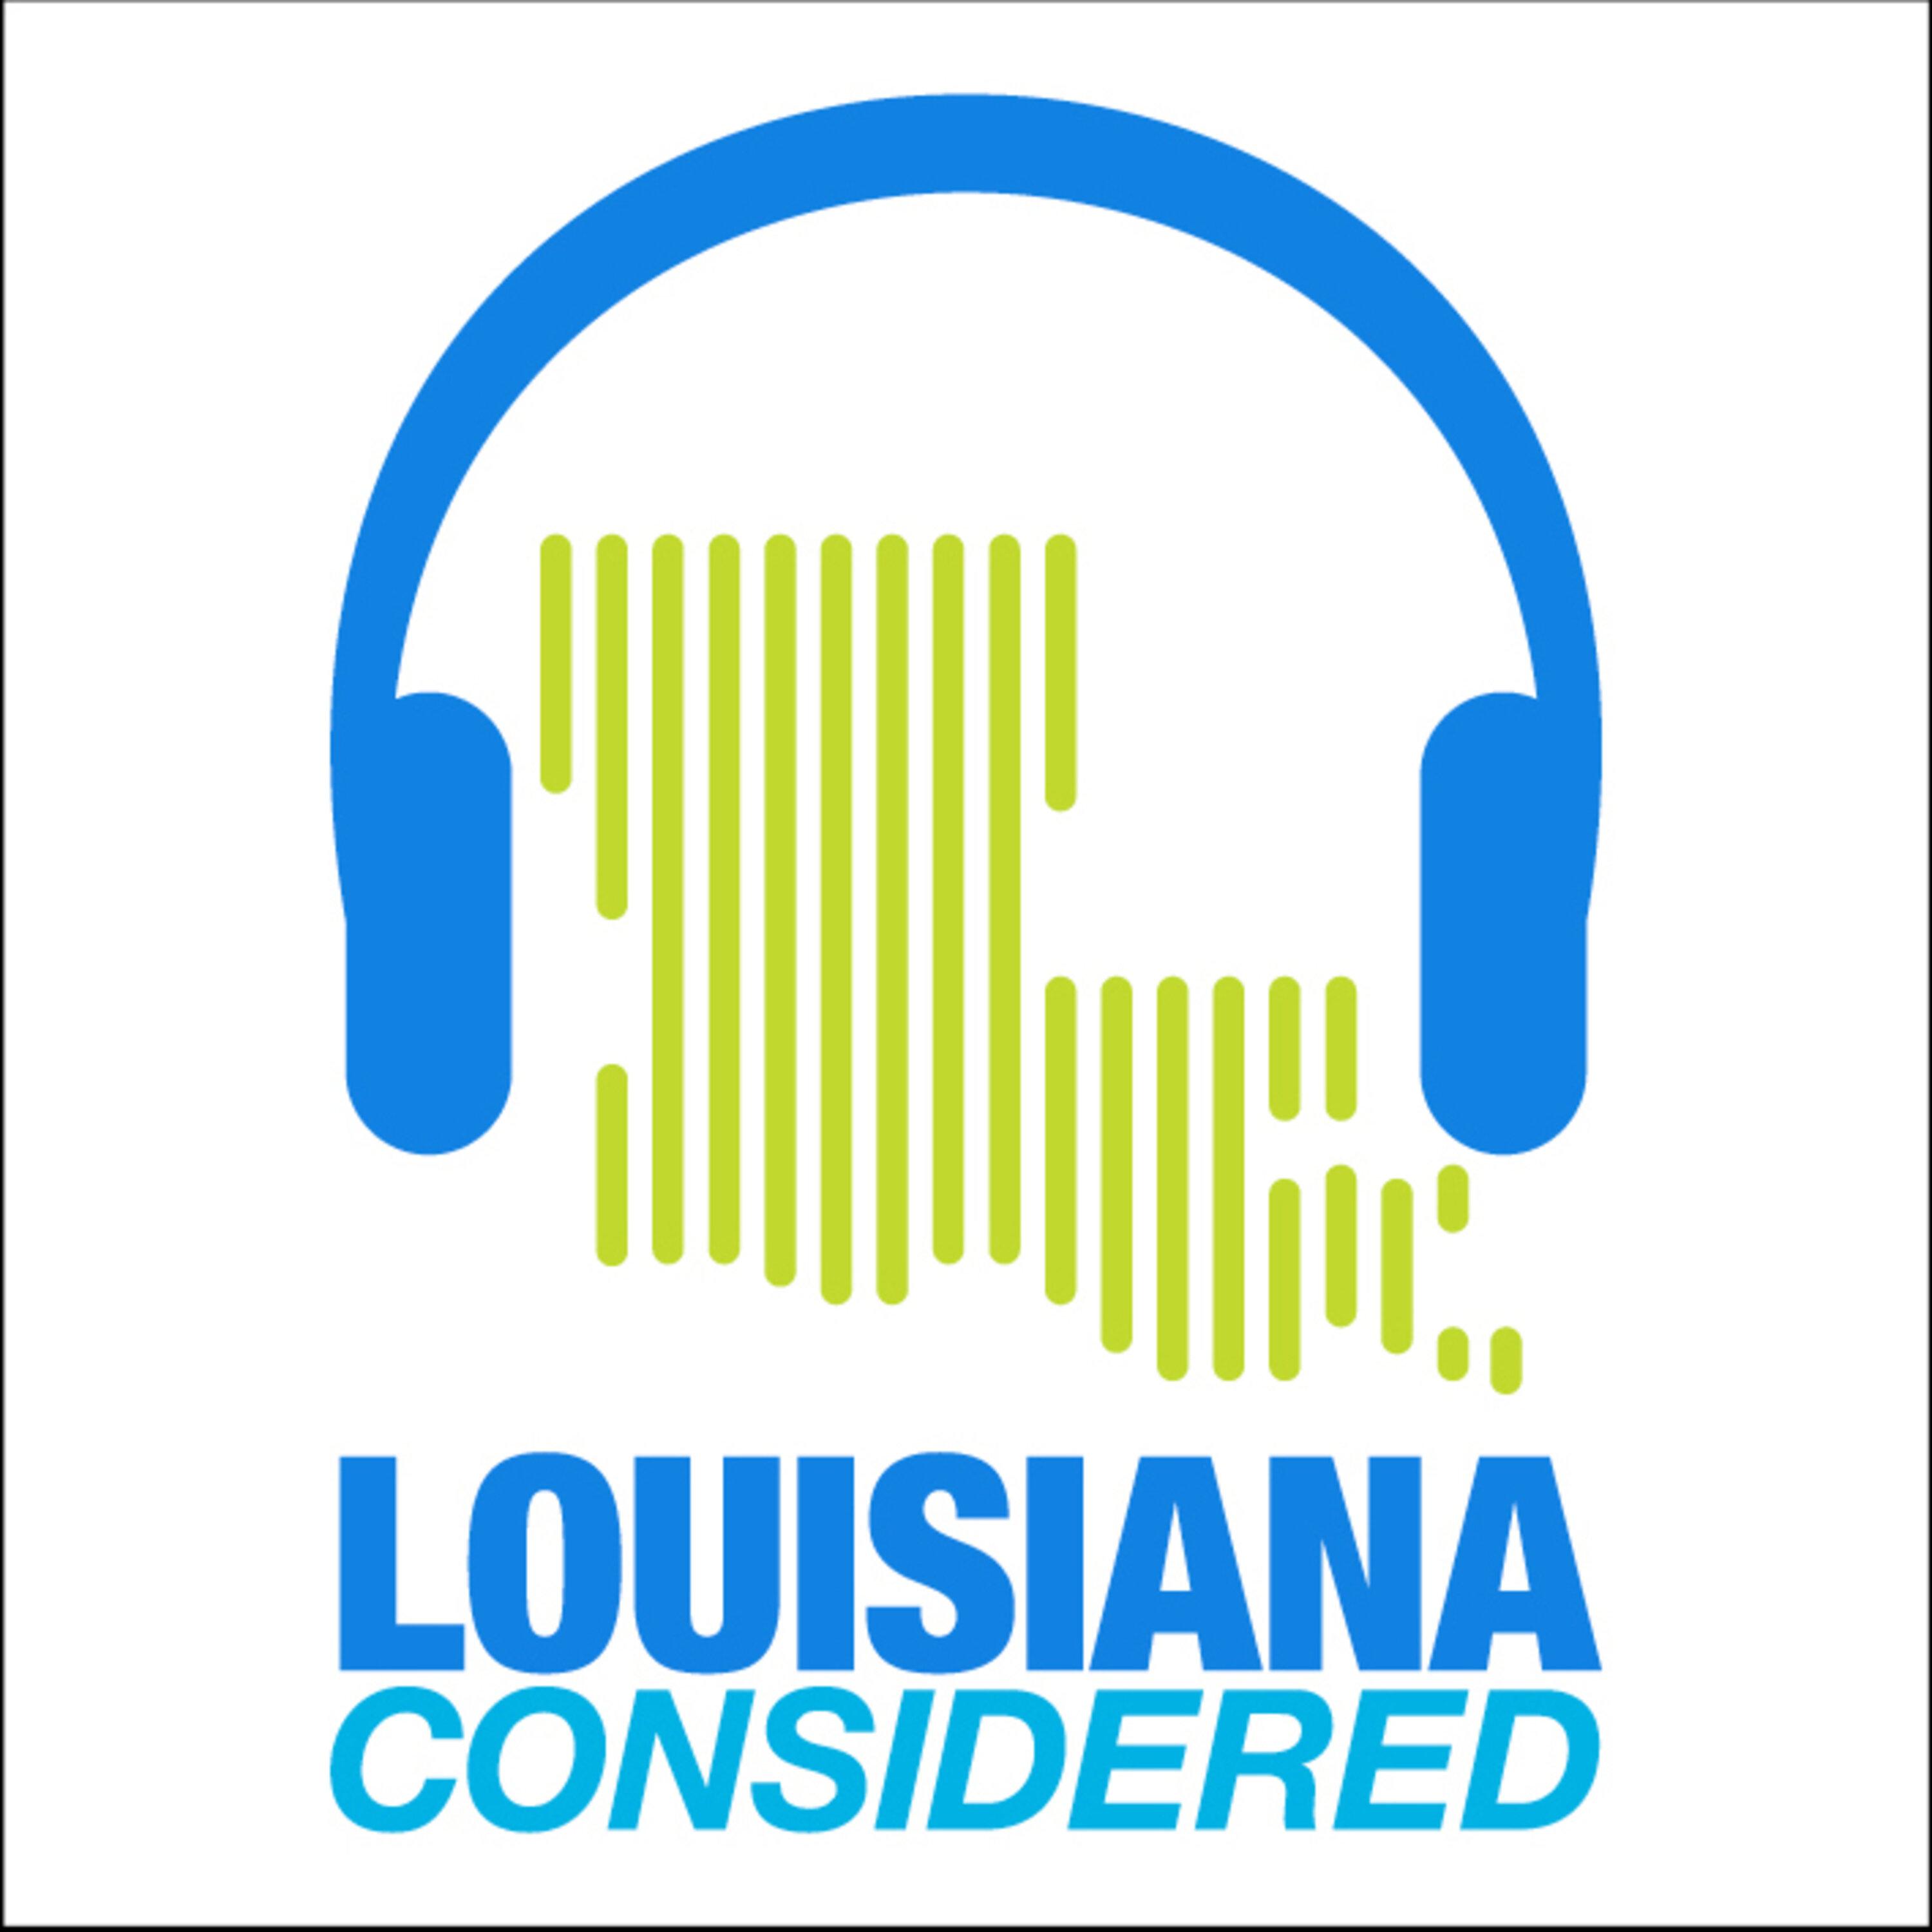 Thumbnail for "Louisiana Considered: Bike routes in the works in New Orleans and Baton Rouge".